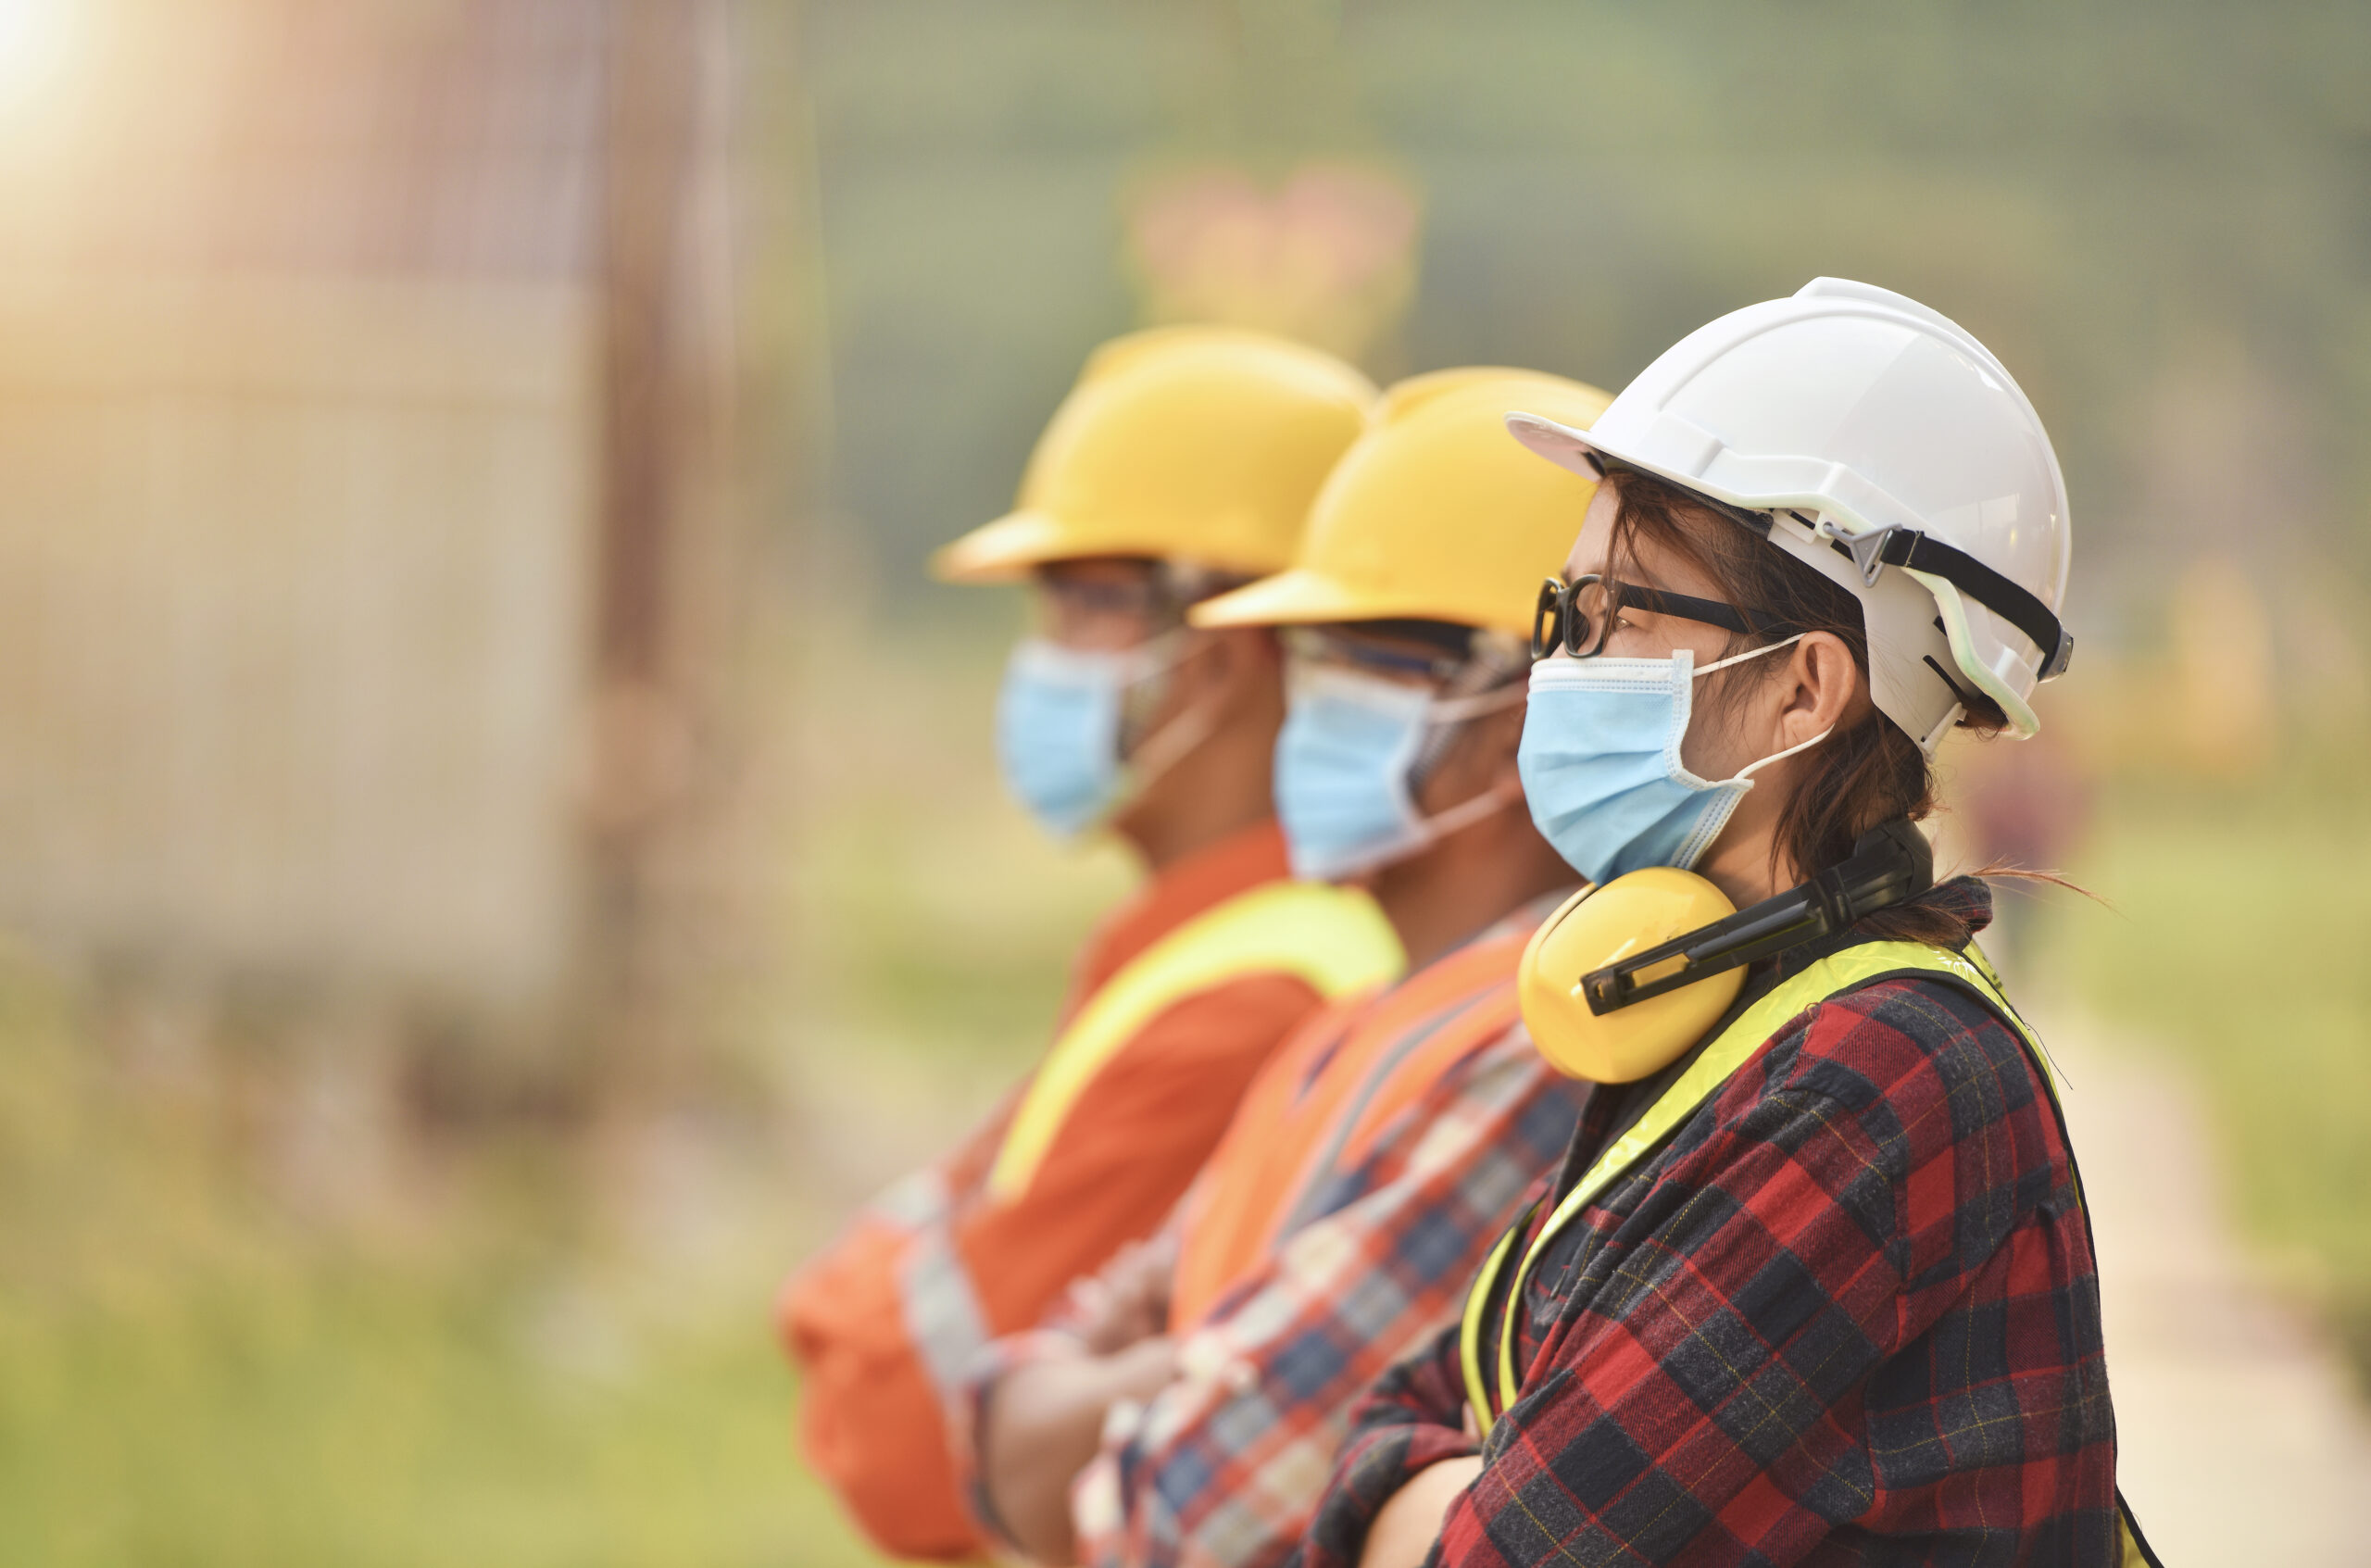 Why the construction sector needs to embrace gender diversity